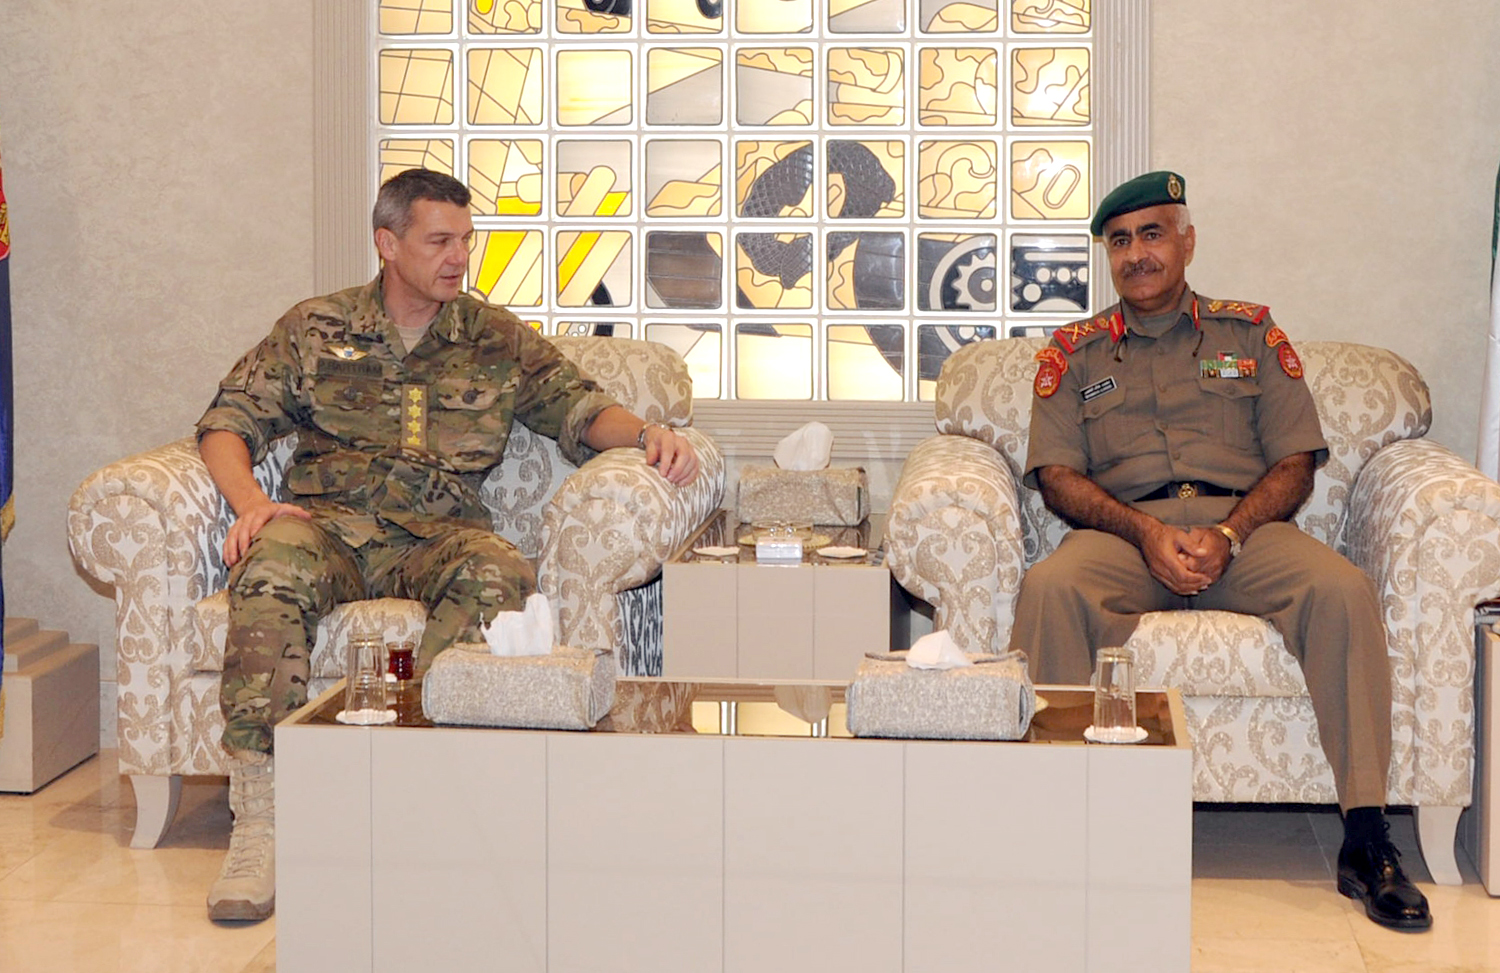 Kuwaiti Army Deputy Chief of Staff Lt. Gen. Mohammad Khaled Al-Kheder and visiting Danish Chief of Defence General Peter Bartram